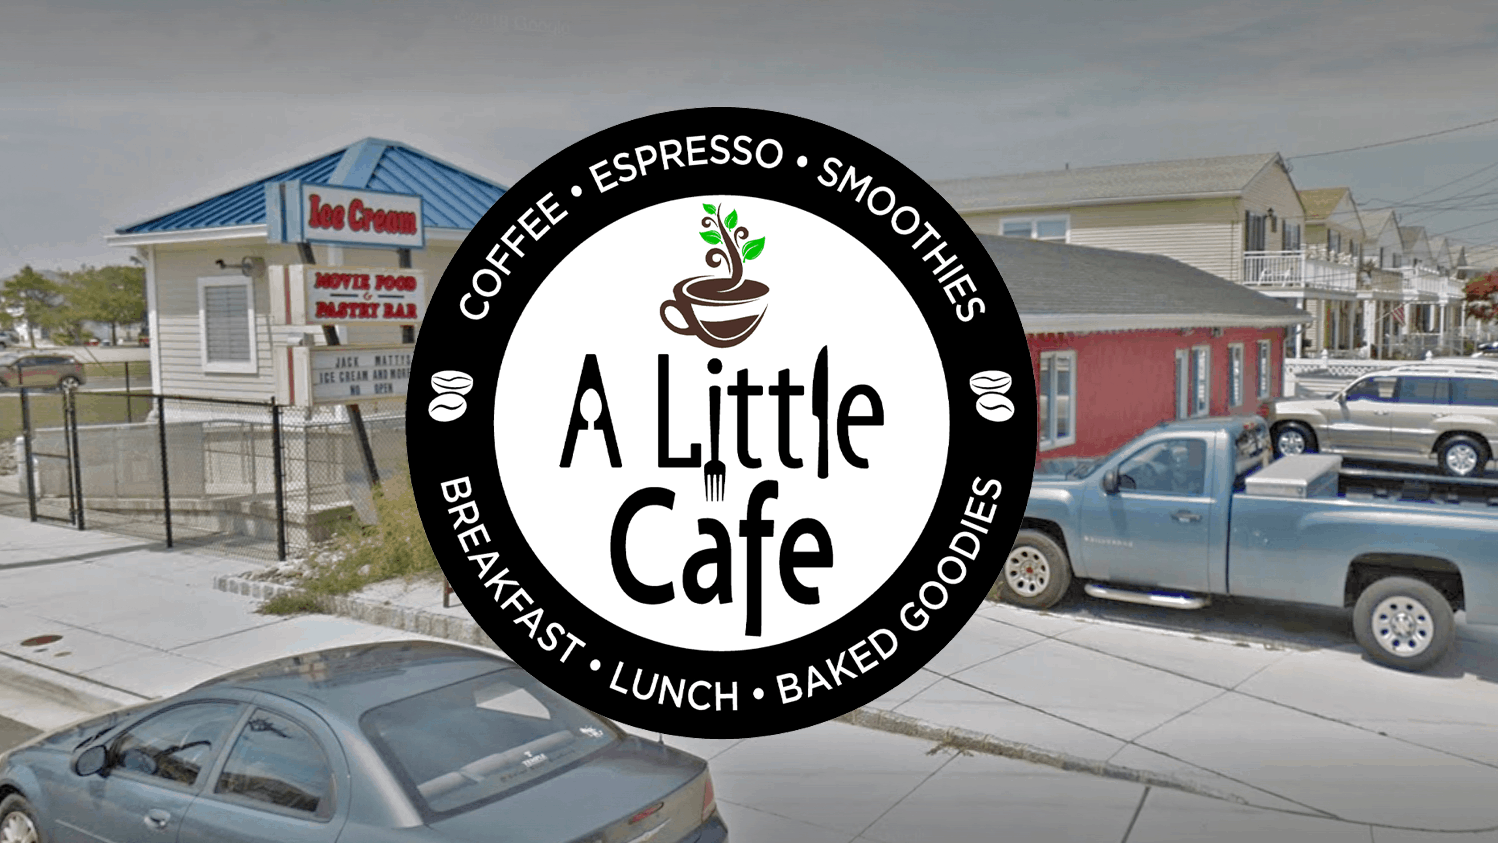 NEW Cafe Coming To Wildwood Crest!